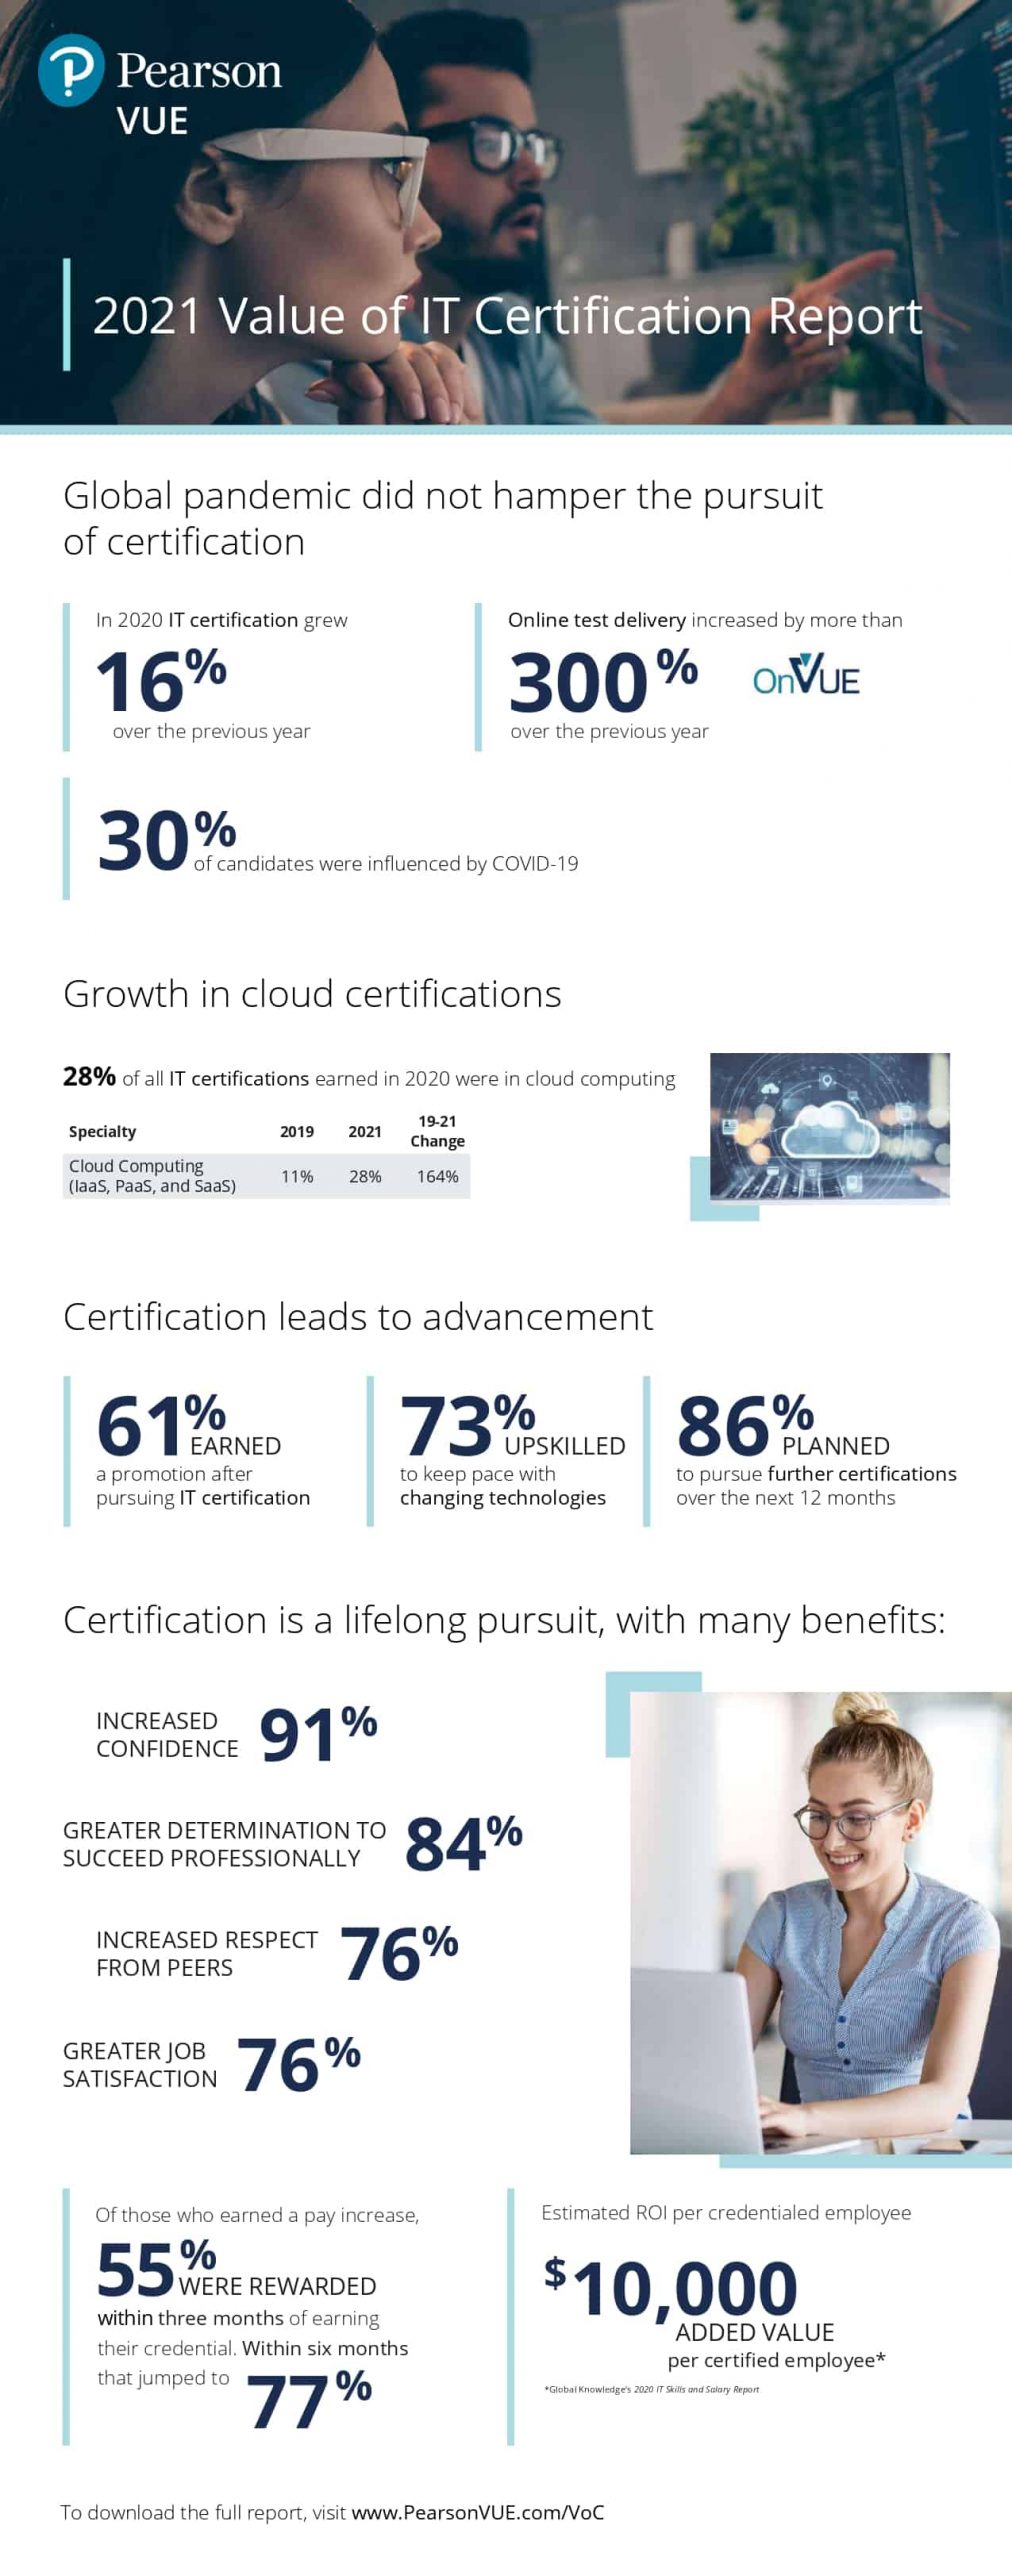 Pearson VUEs Value of IT Certification study highlights benefits of IT certification in challenging time